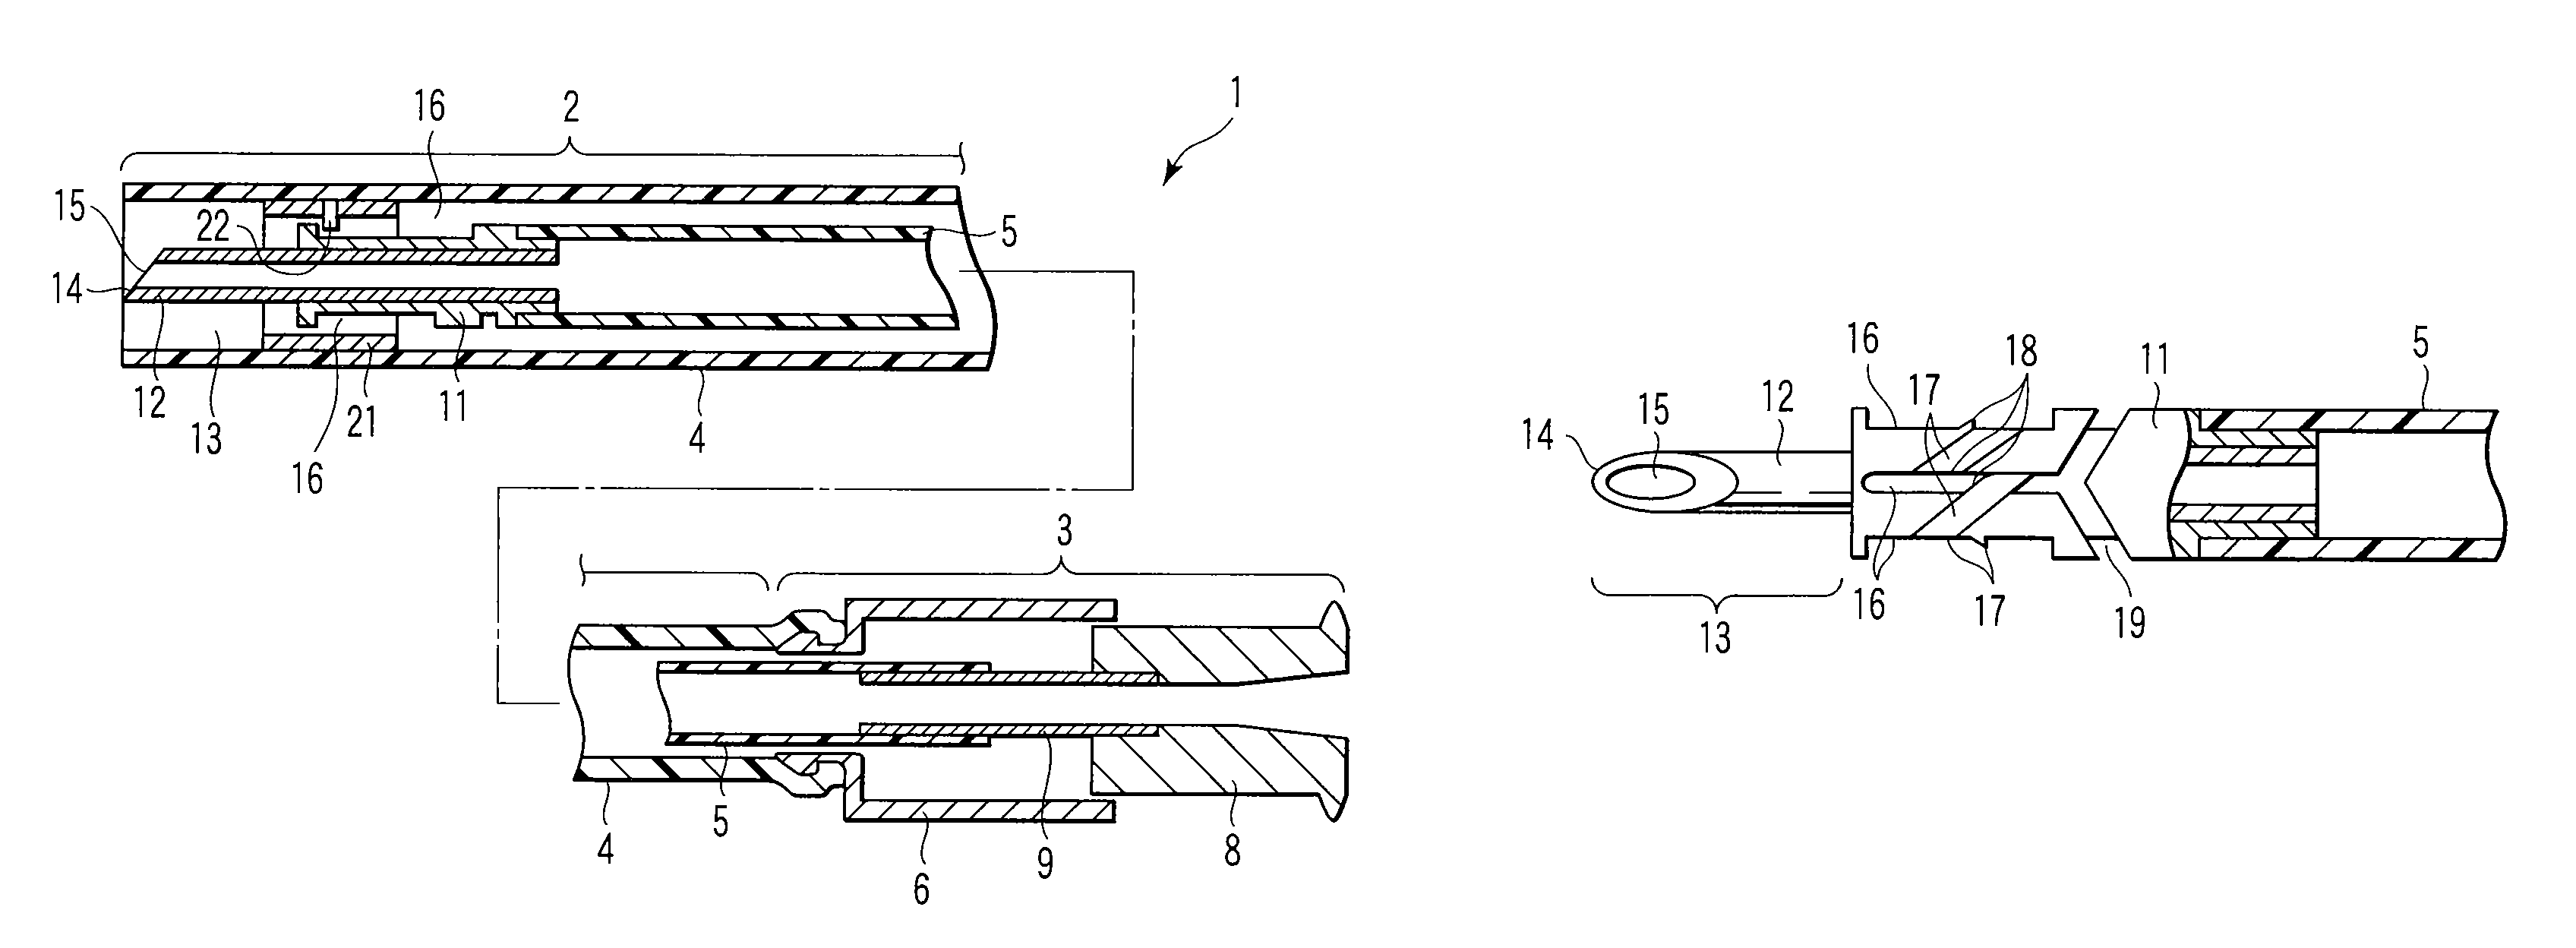 Injection needle apparatus for making injection in tissue in body cavity